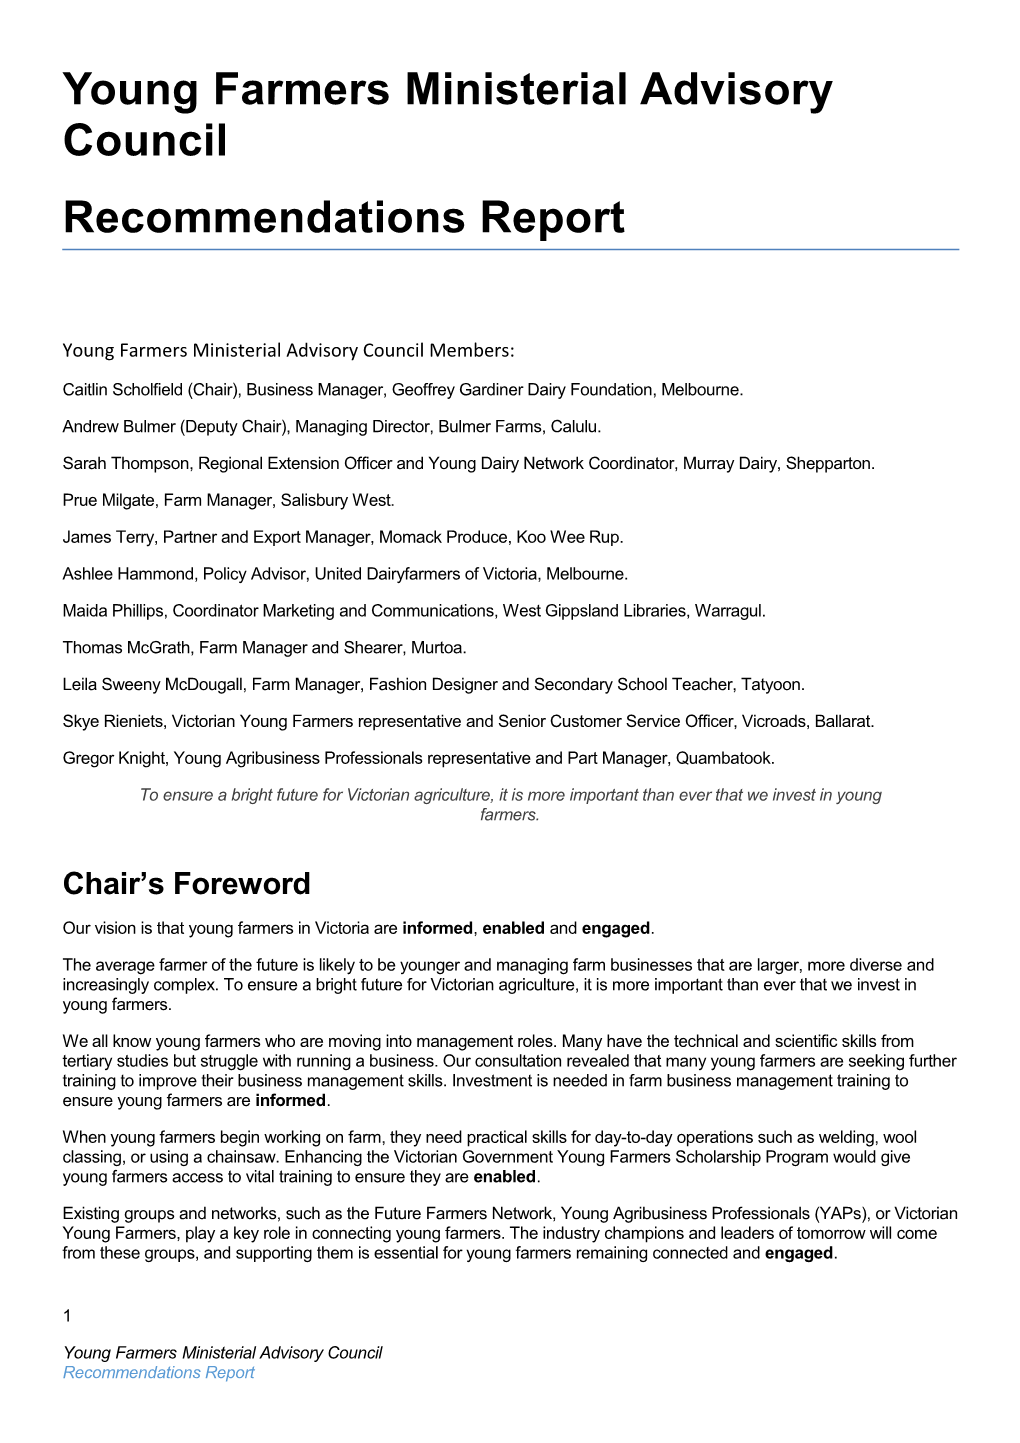 Young Farmers Ministerial Advisory Council Recommendations Report